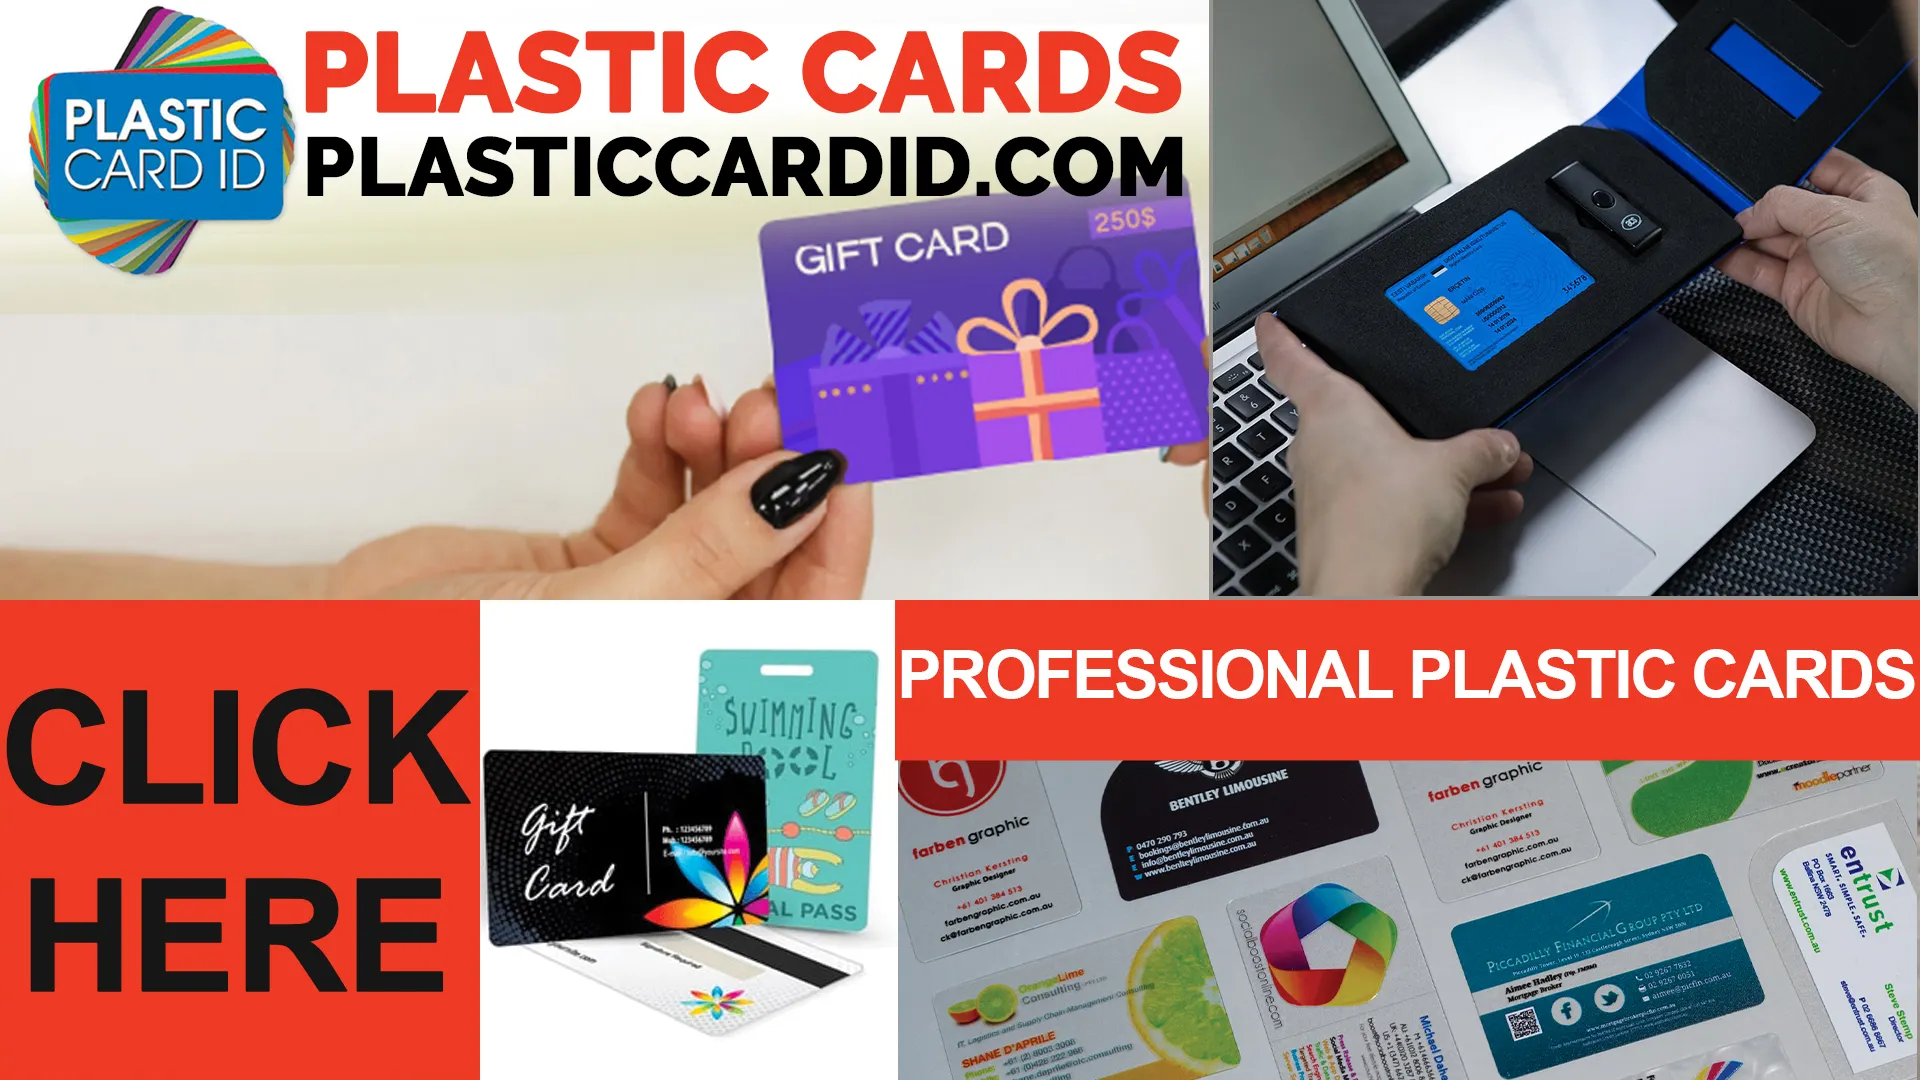  Diverse Product Range for Every Card-Printing Need 